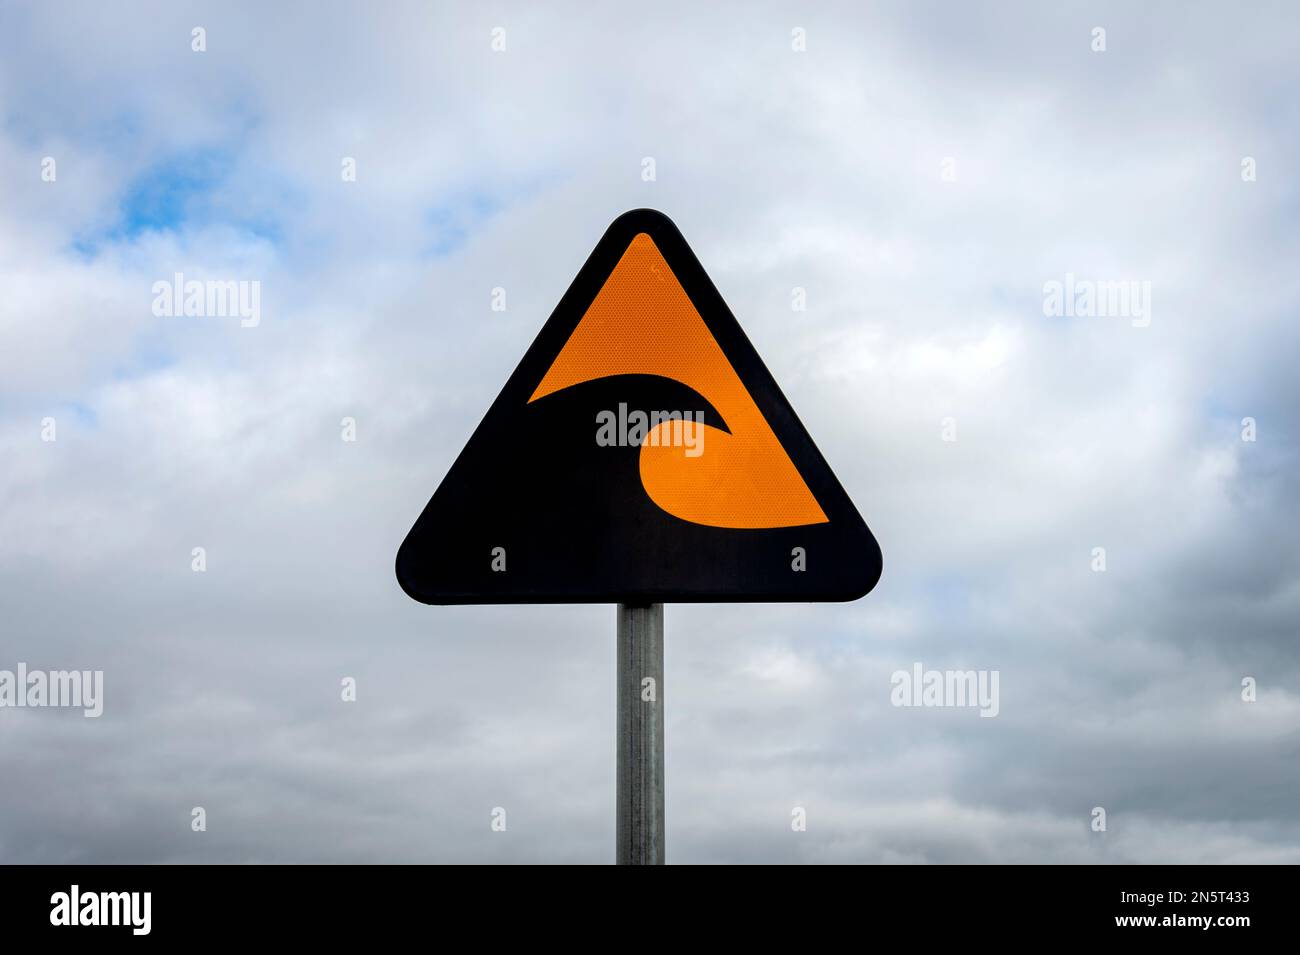 tsunami warning sign against a cloudy sky Stock Photo